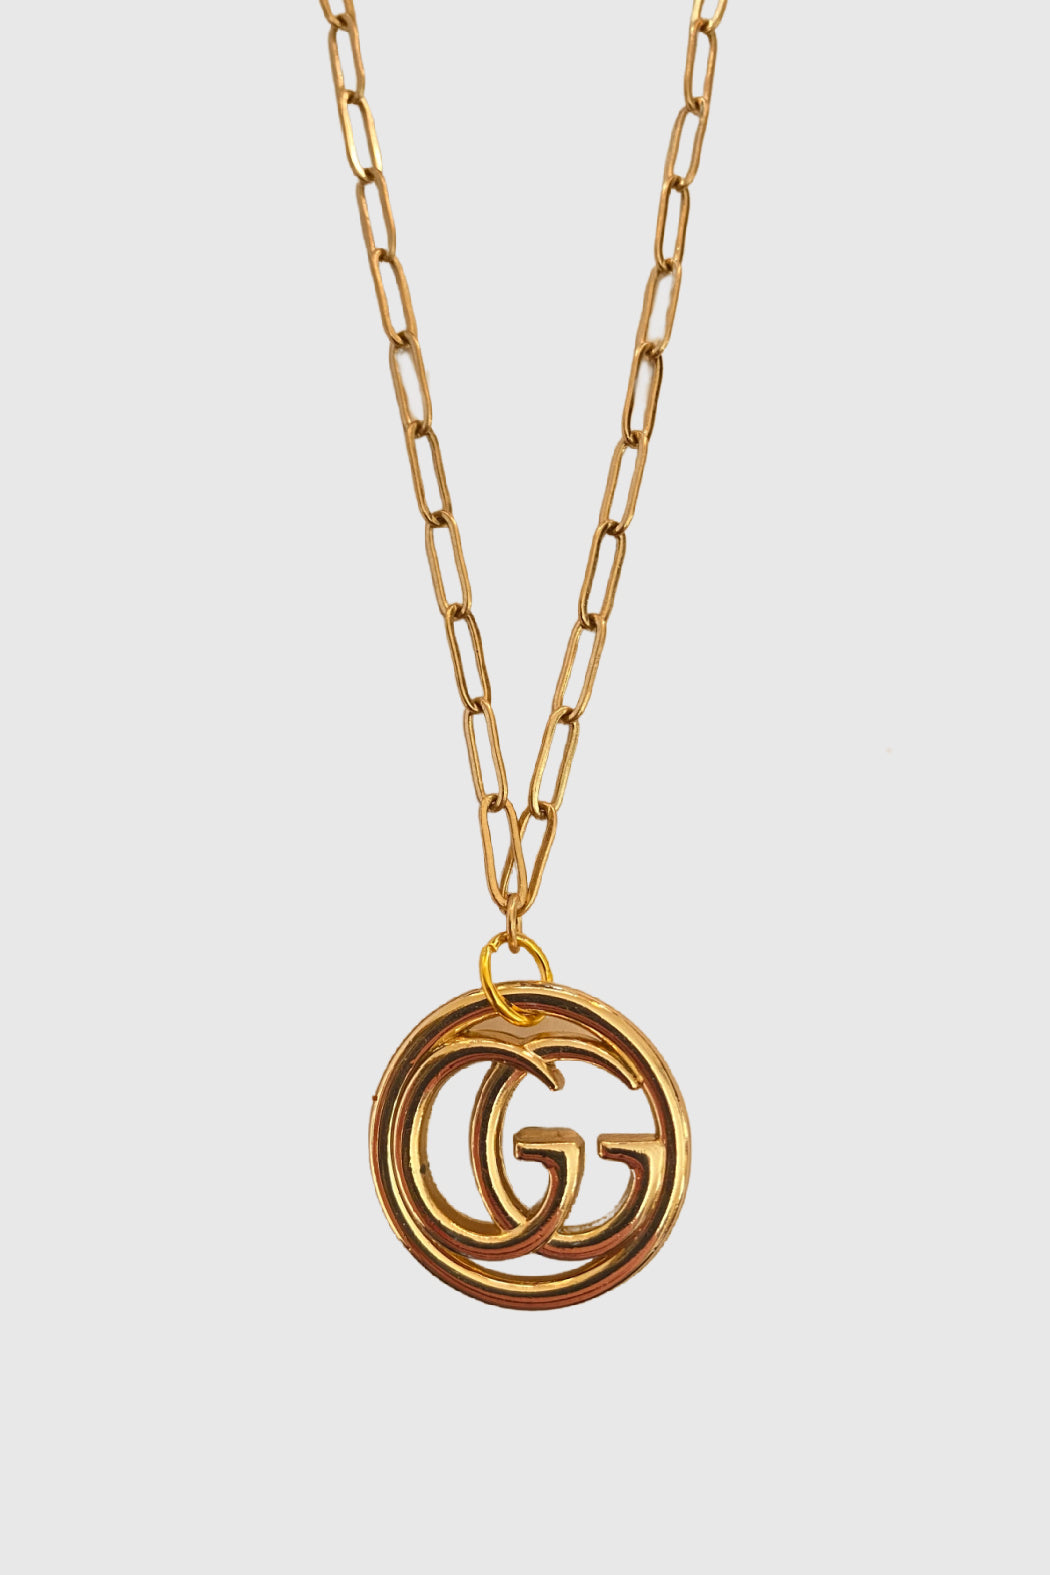 Gucci Pendant Necklace - Embellish Your Life 